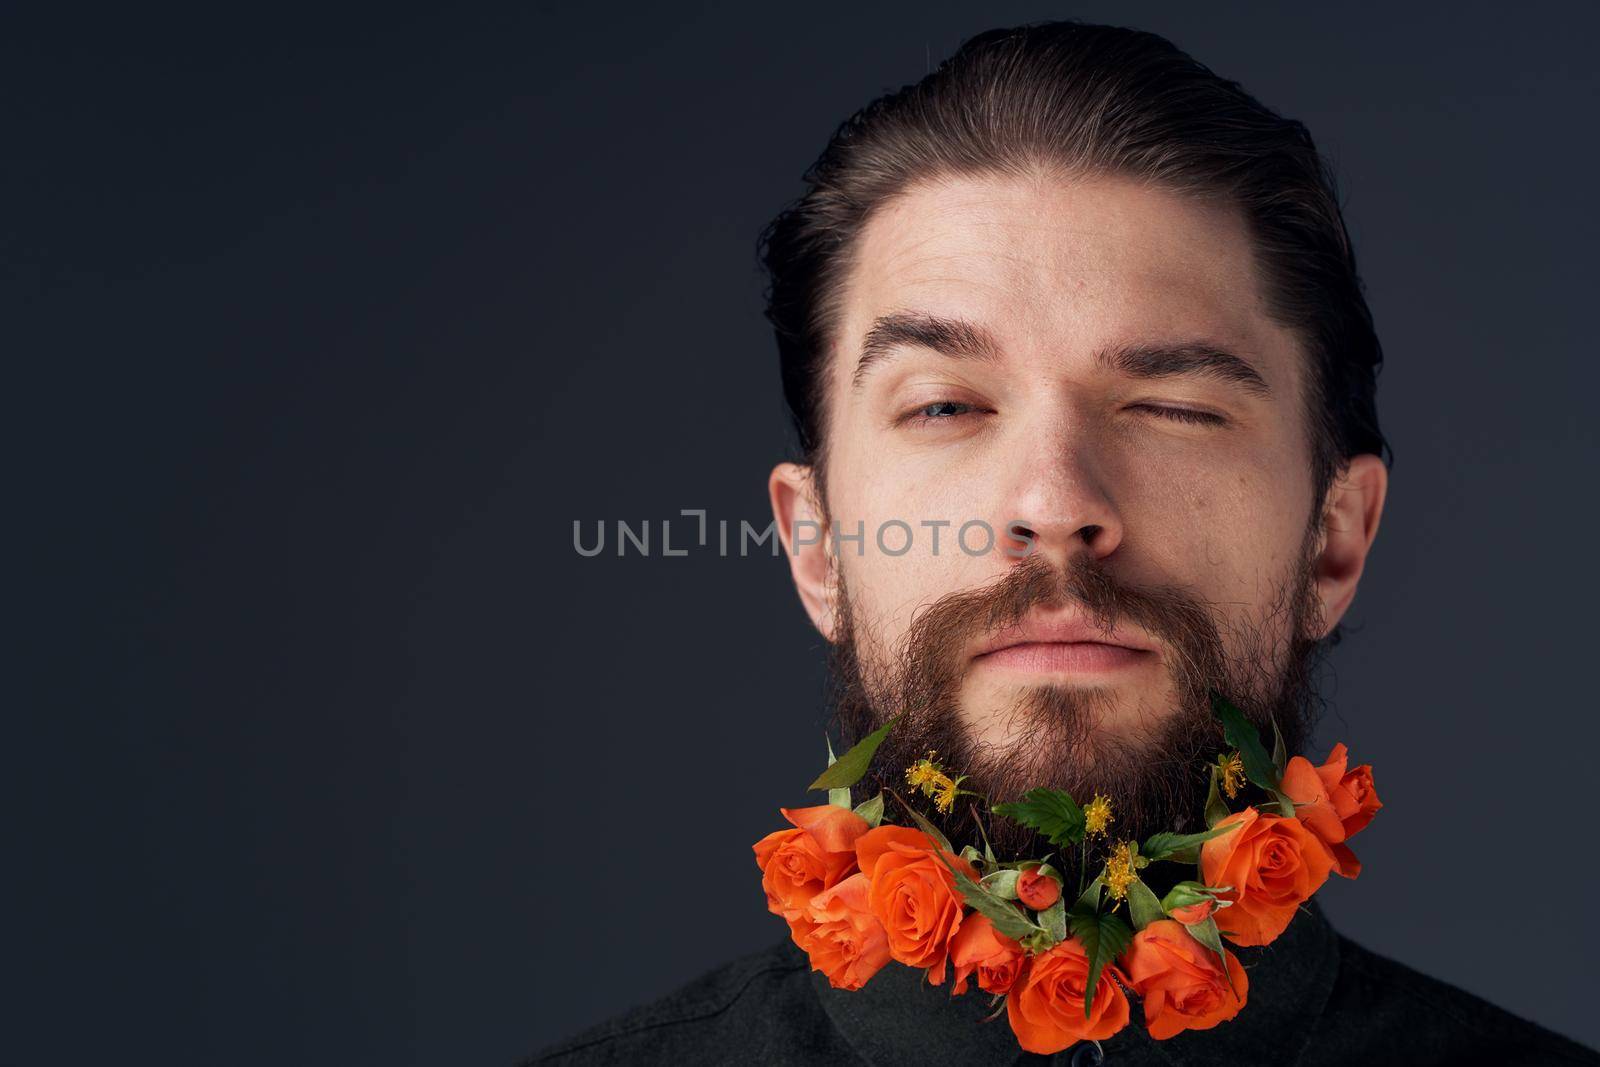 Cute man and flowers in the city romance decoration black background by SHOTPRIME